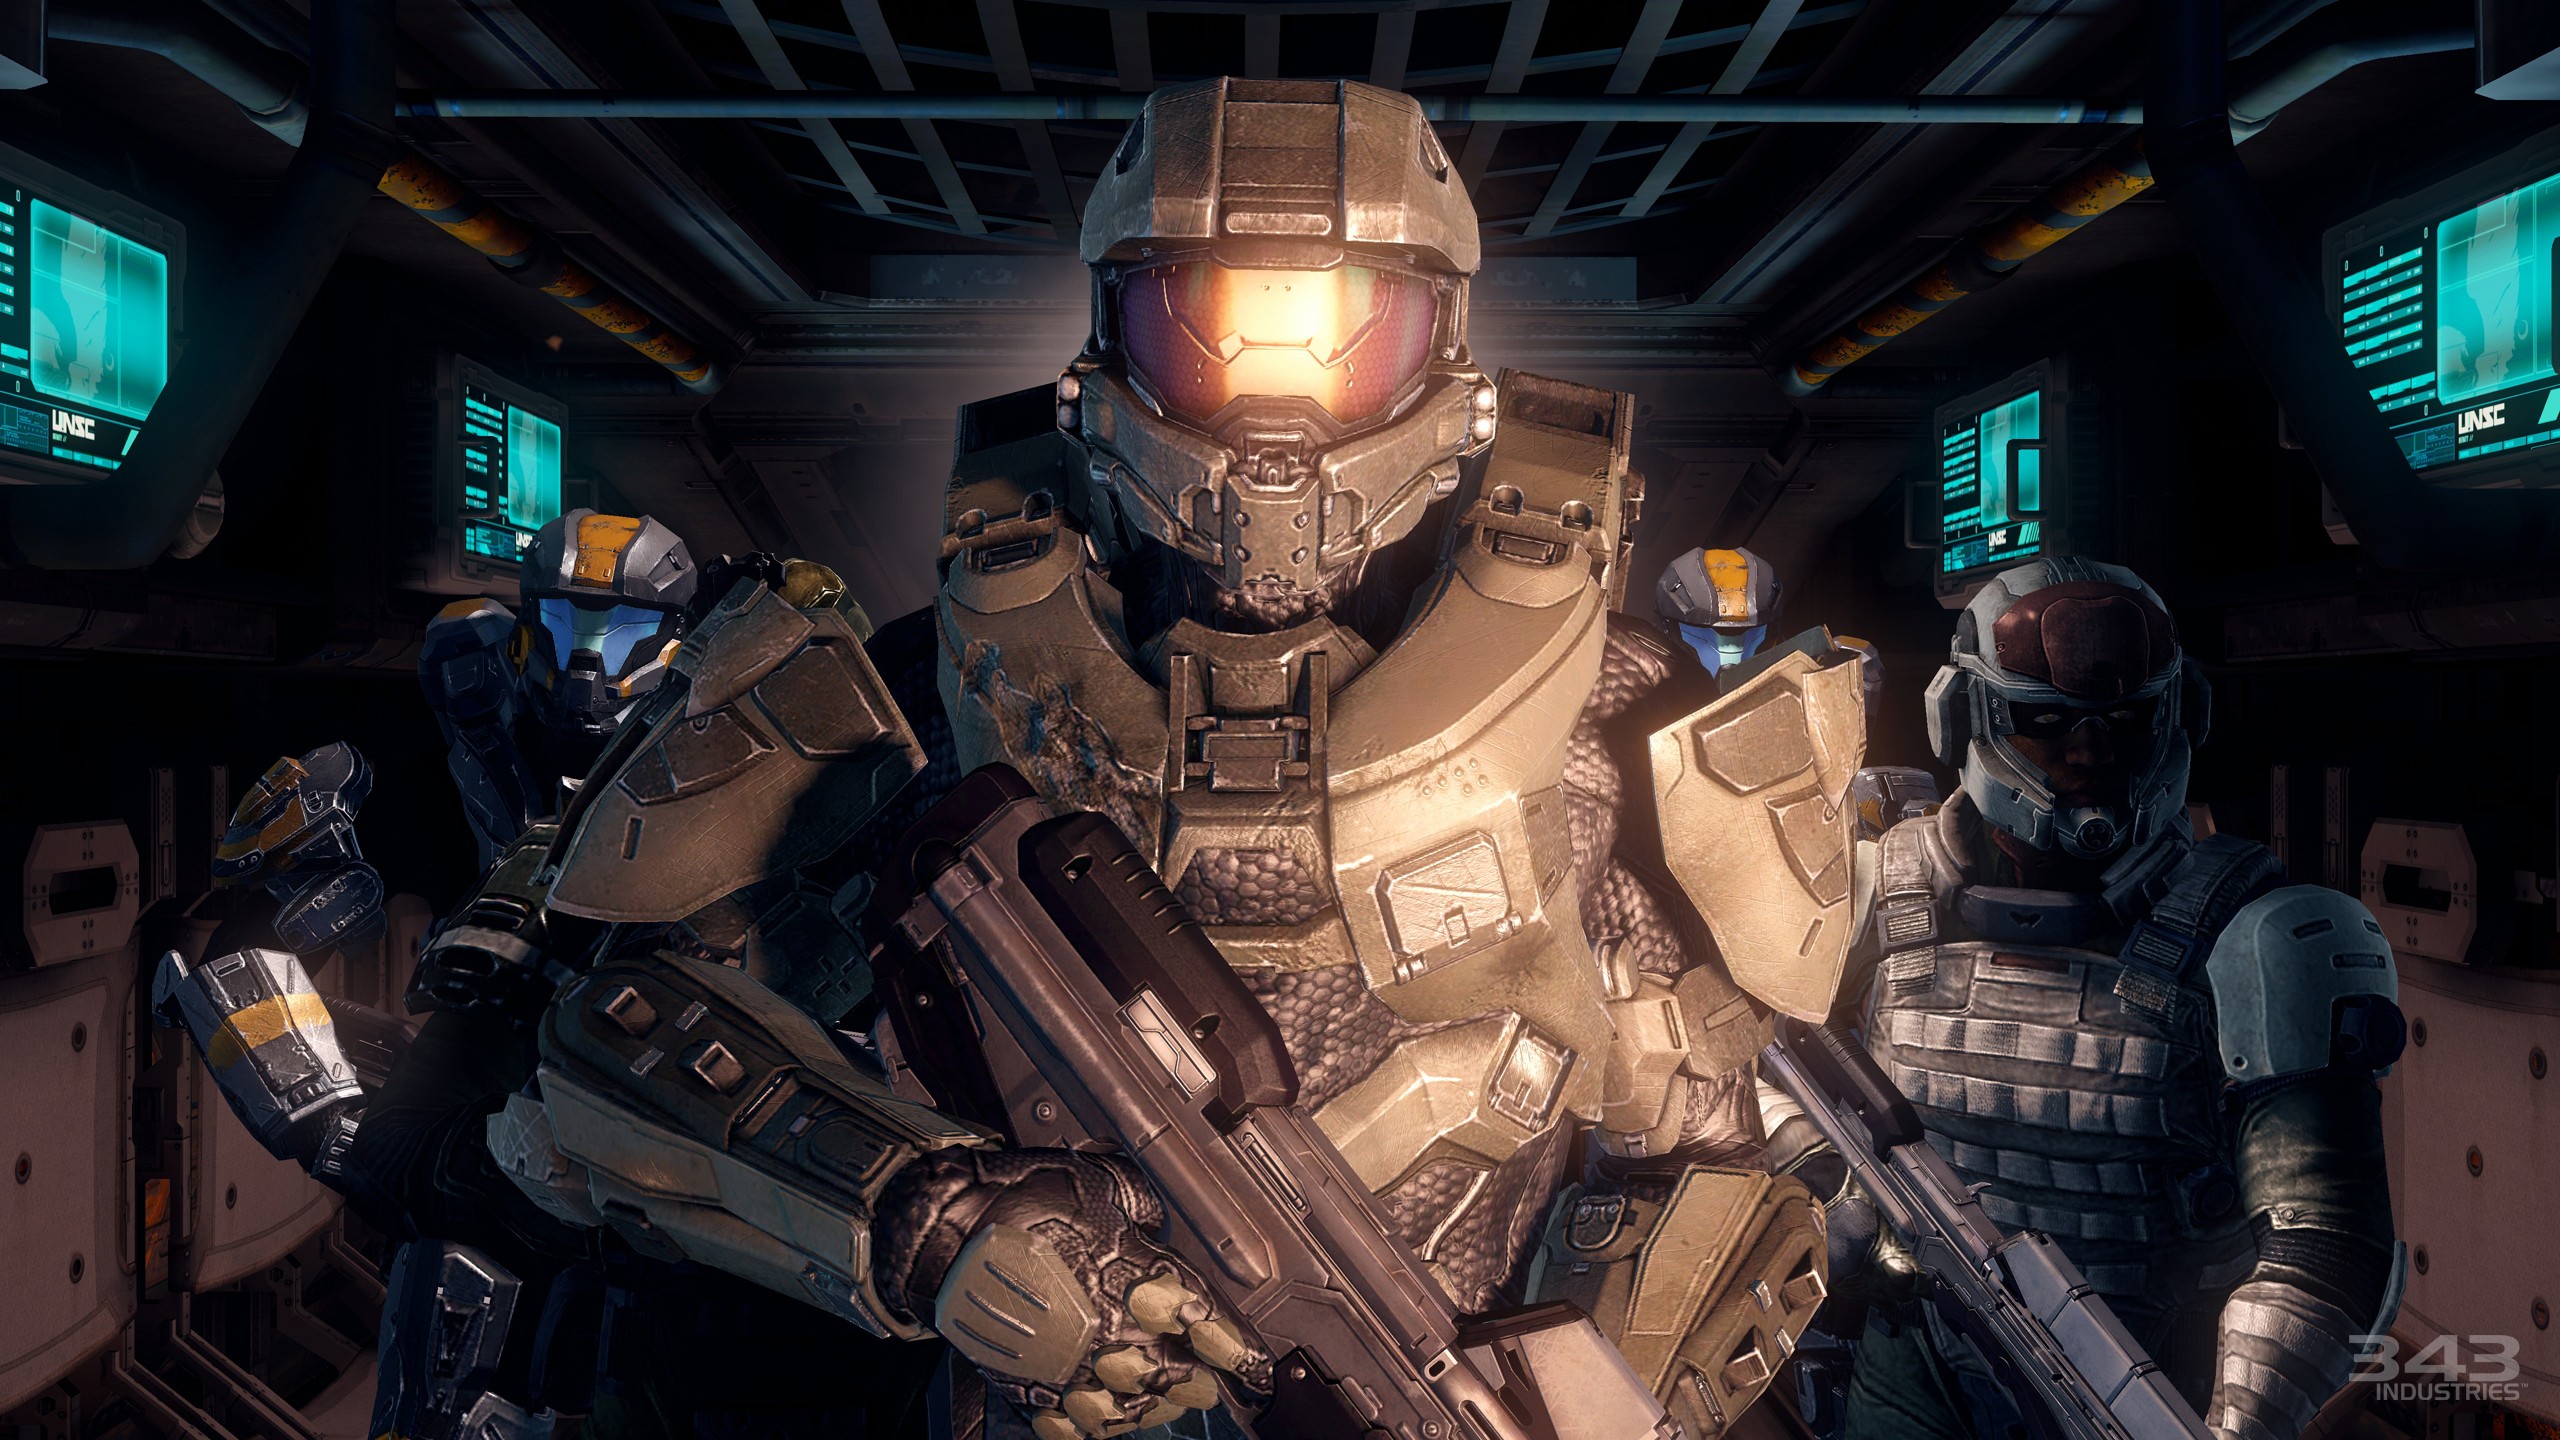 Master Chief Halo 4 343 Industries Halo Master Chief Collection Xbox One Video Games Halo 2560x1440